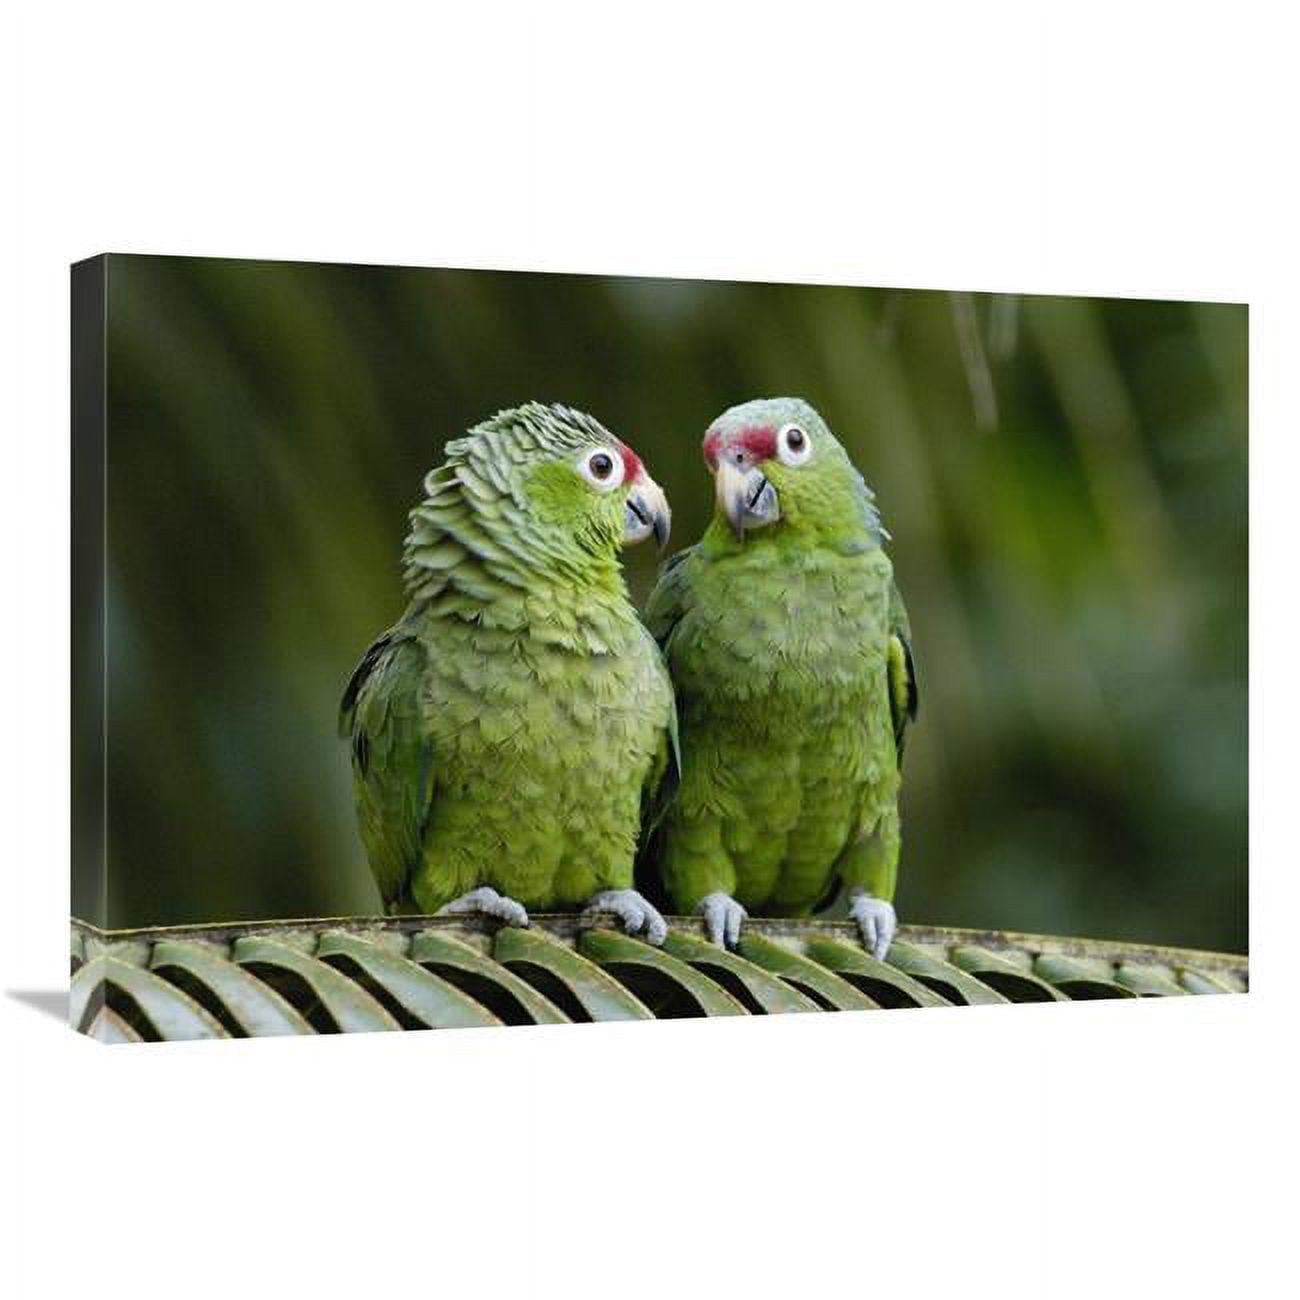 20 X 30 In. Red-lored Parrot Pair Sitting On Branch, Ecuador Art Print - Pete Oxford